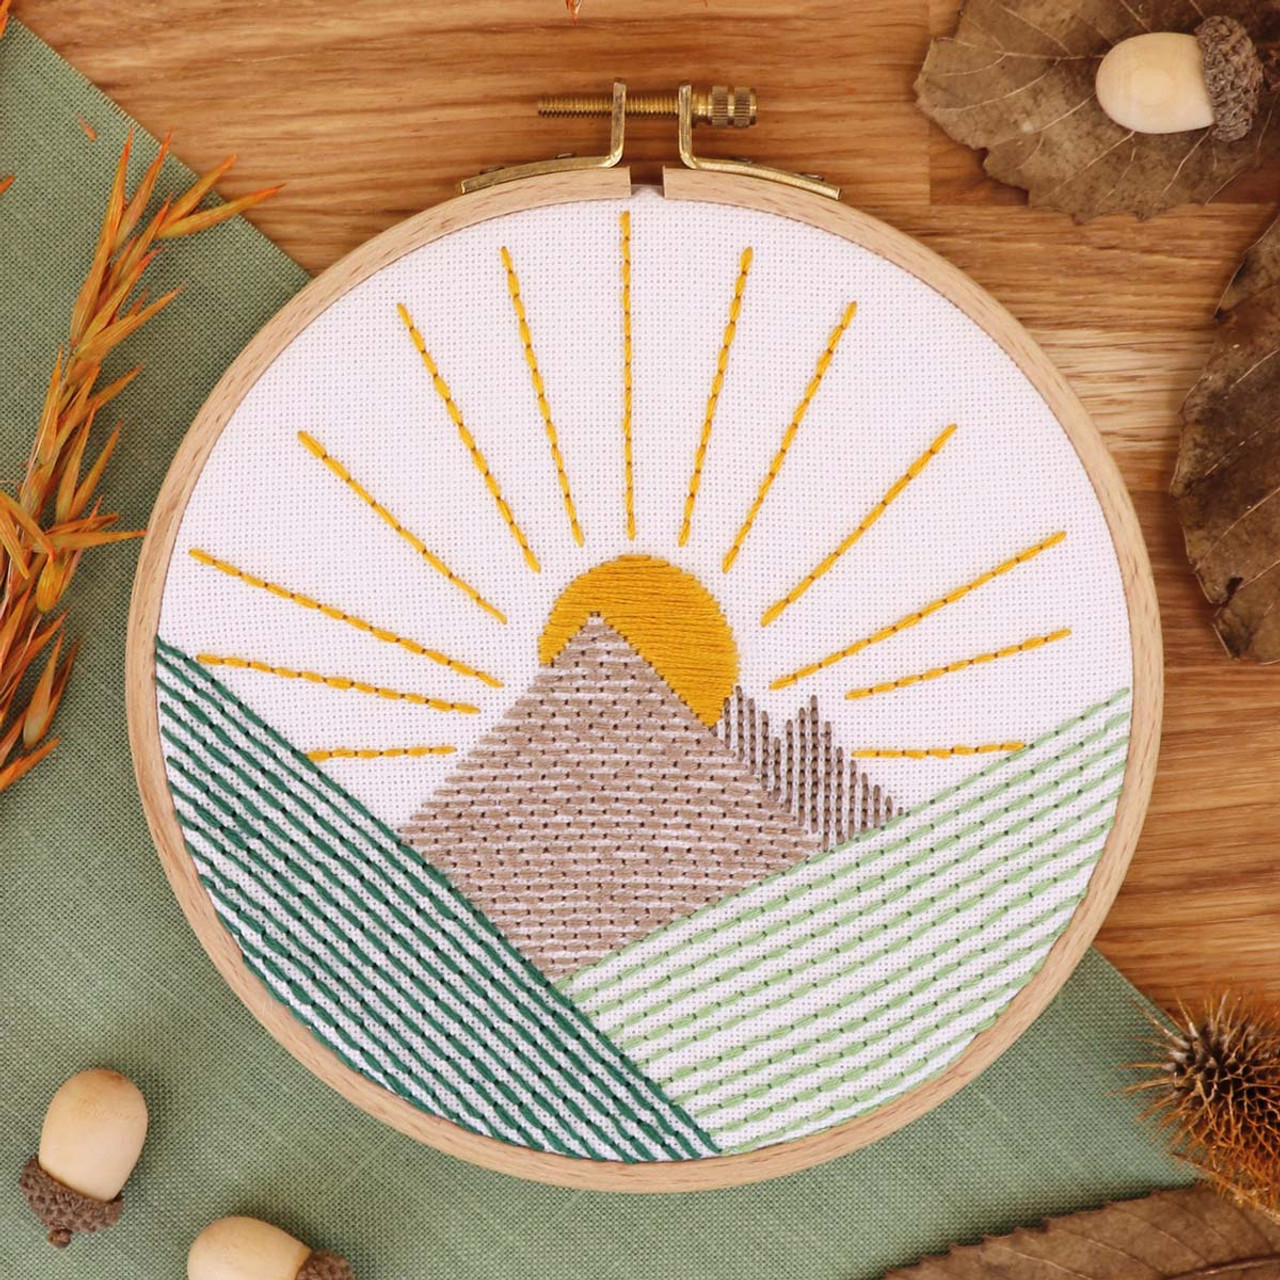 The Best Four Needlepoint Stitches for a Hill or Mountain